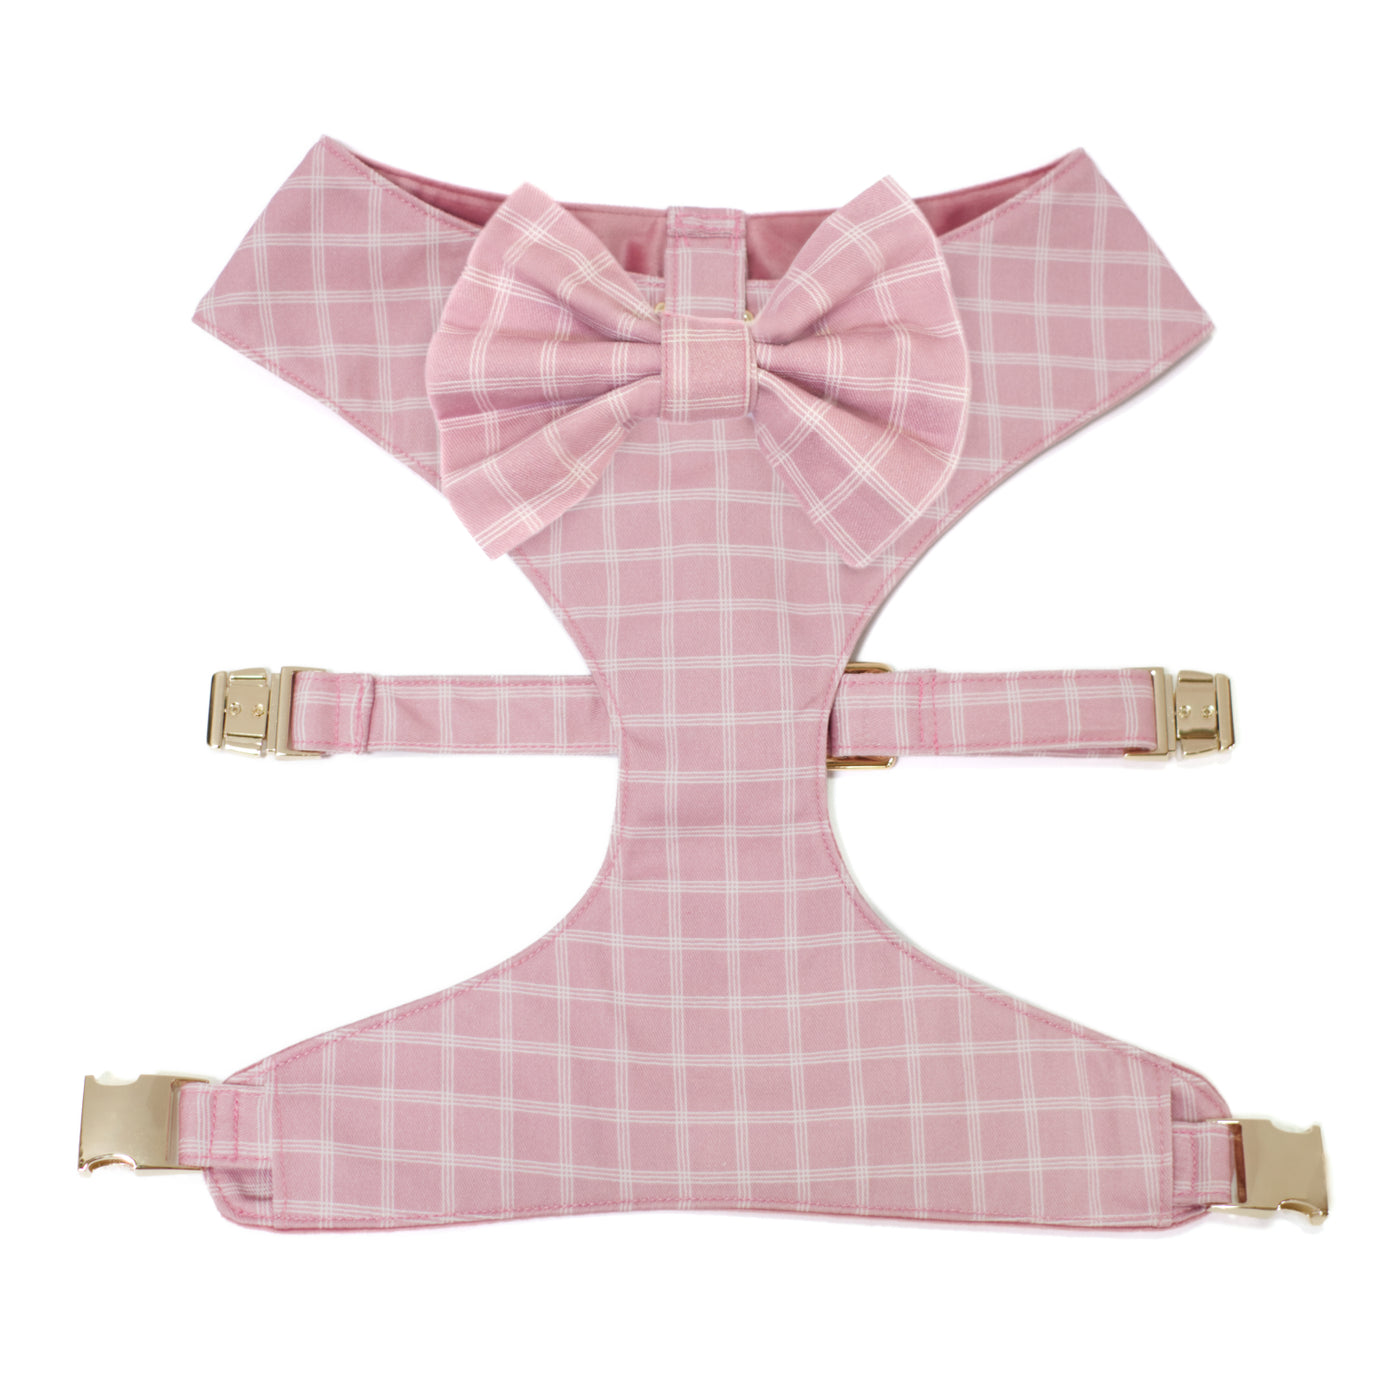 Millennial pink reversible dog harness in triple windowpane plaid with matching dog bow tie